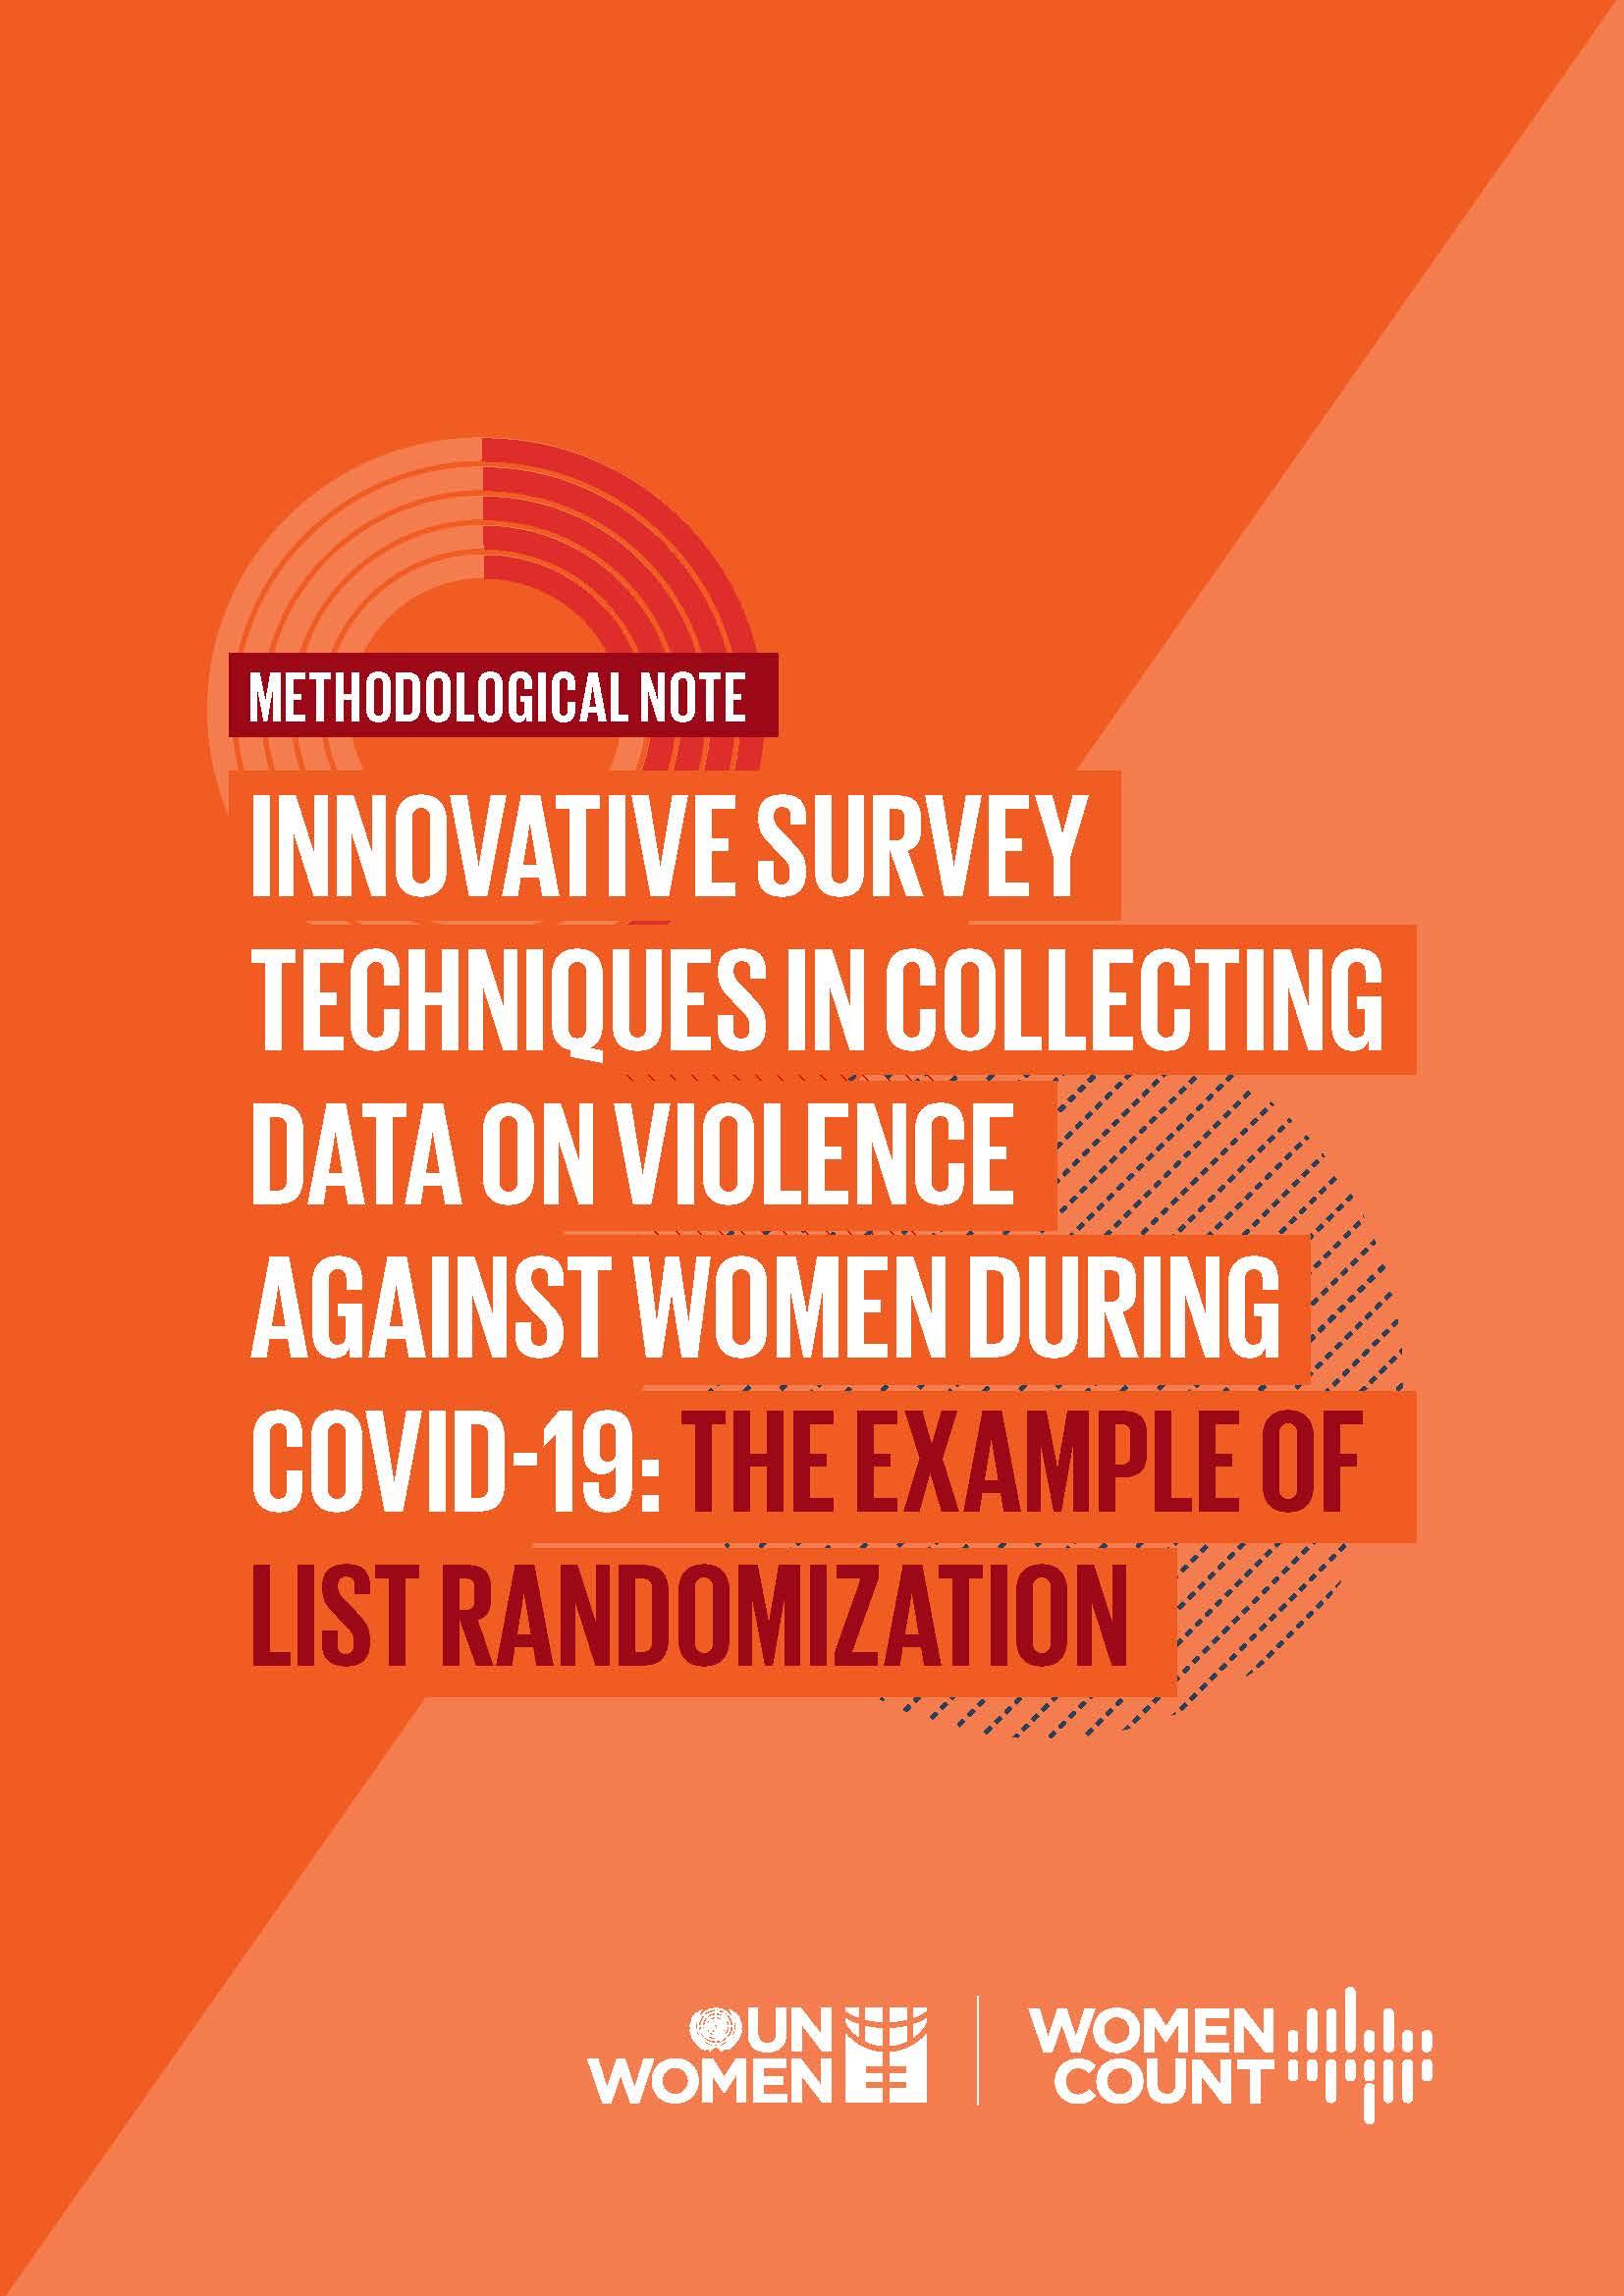 Innovative survey techniques in collecting data on violence against women during COVID-19: The example of list randomization